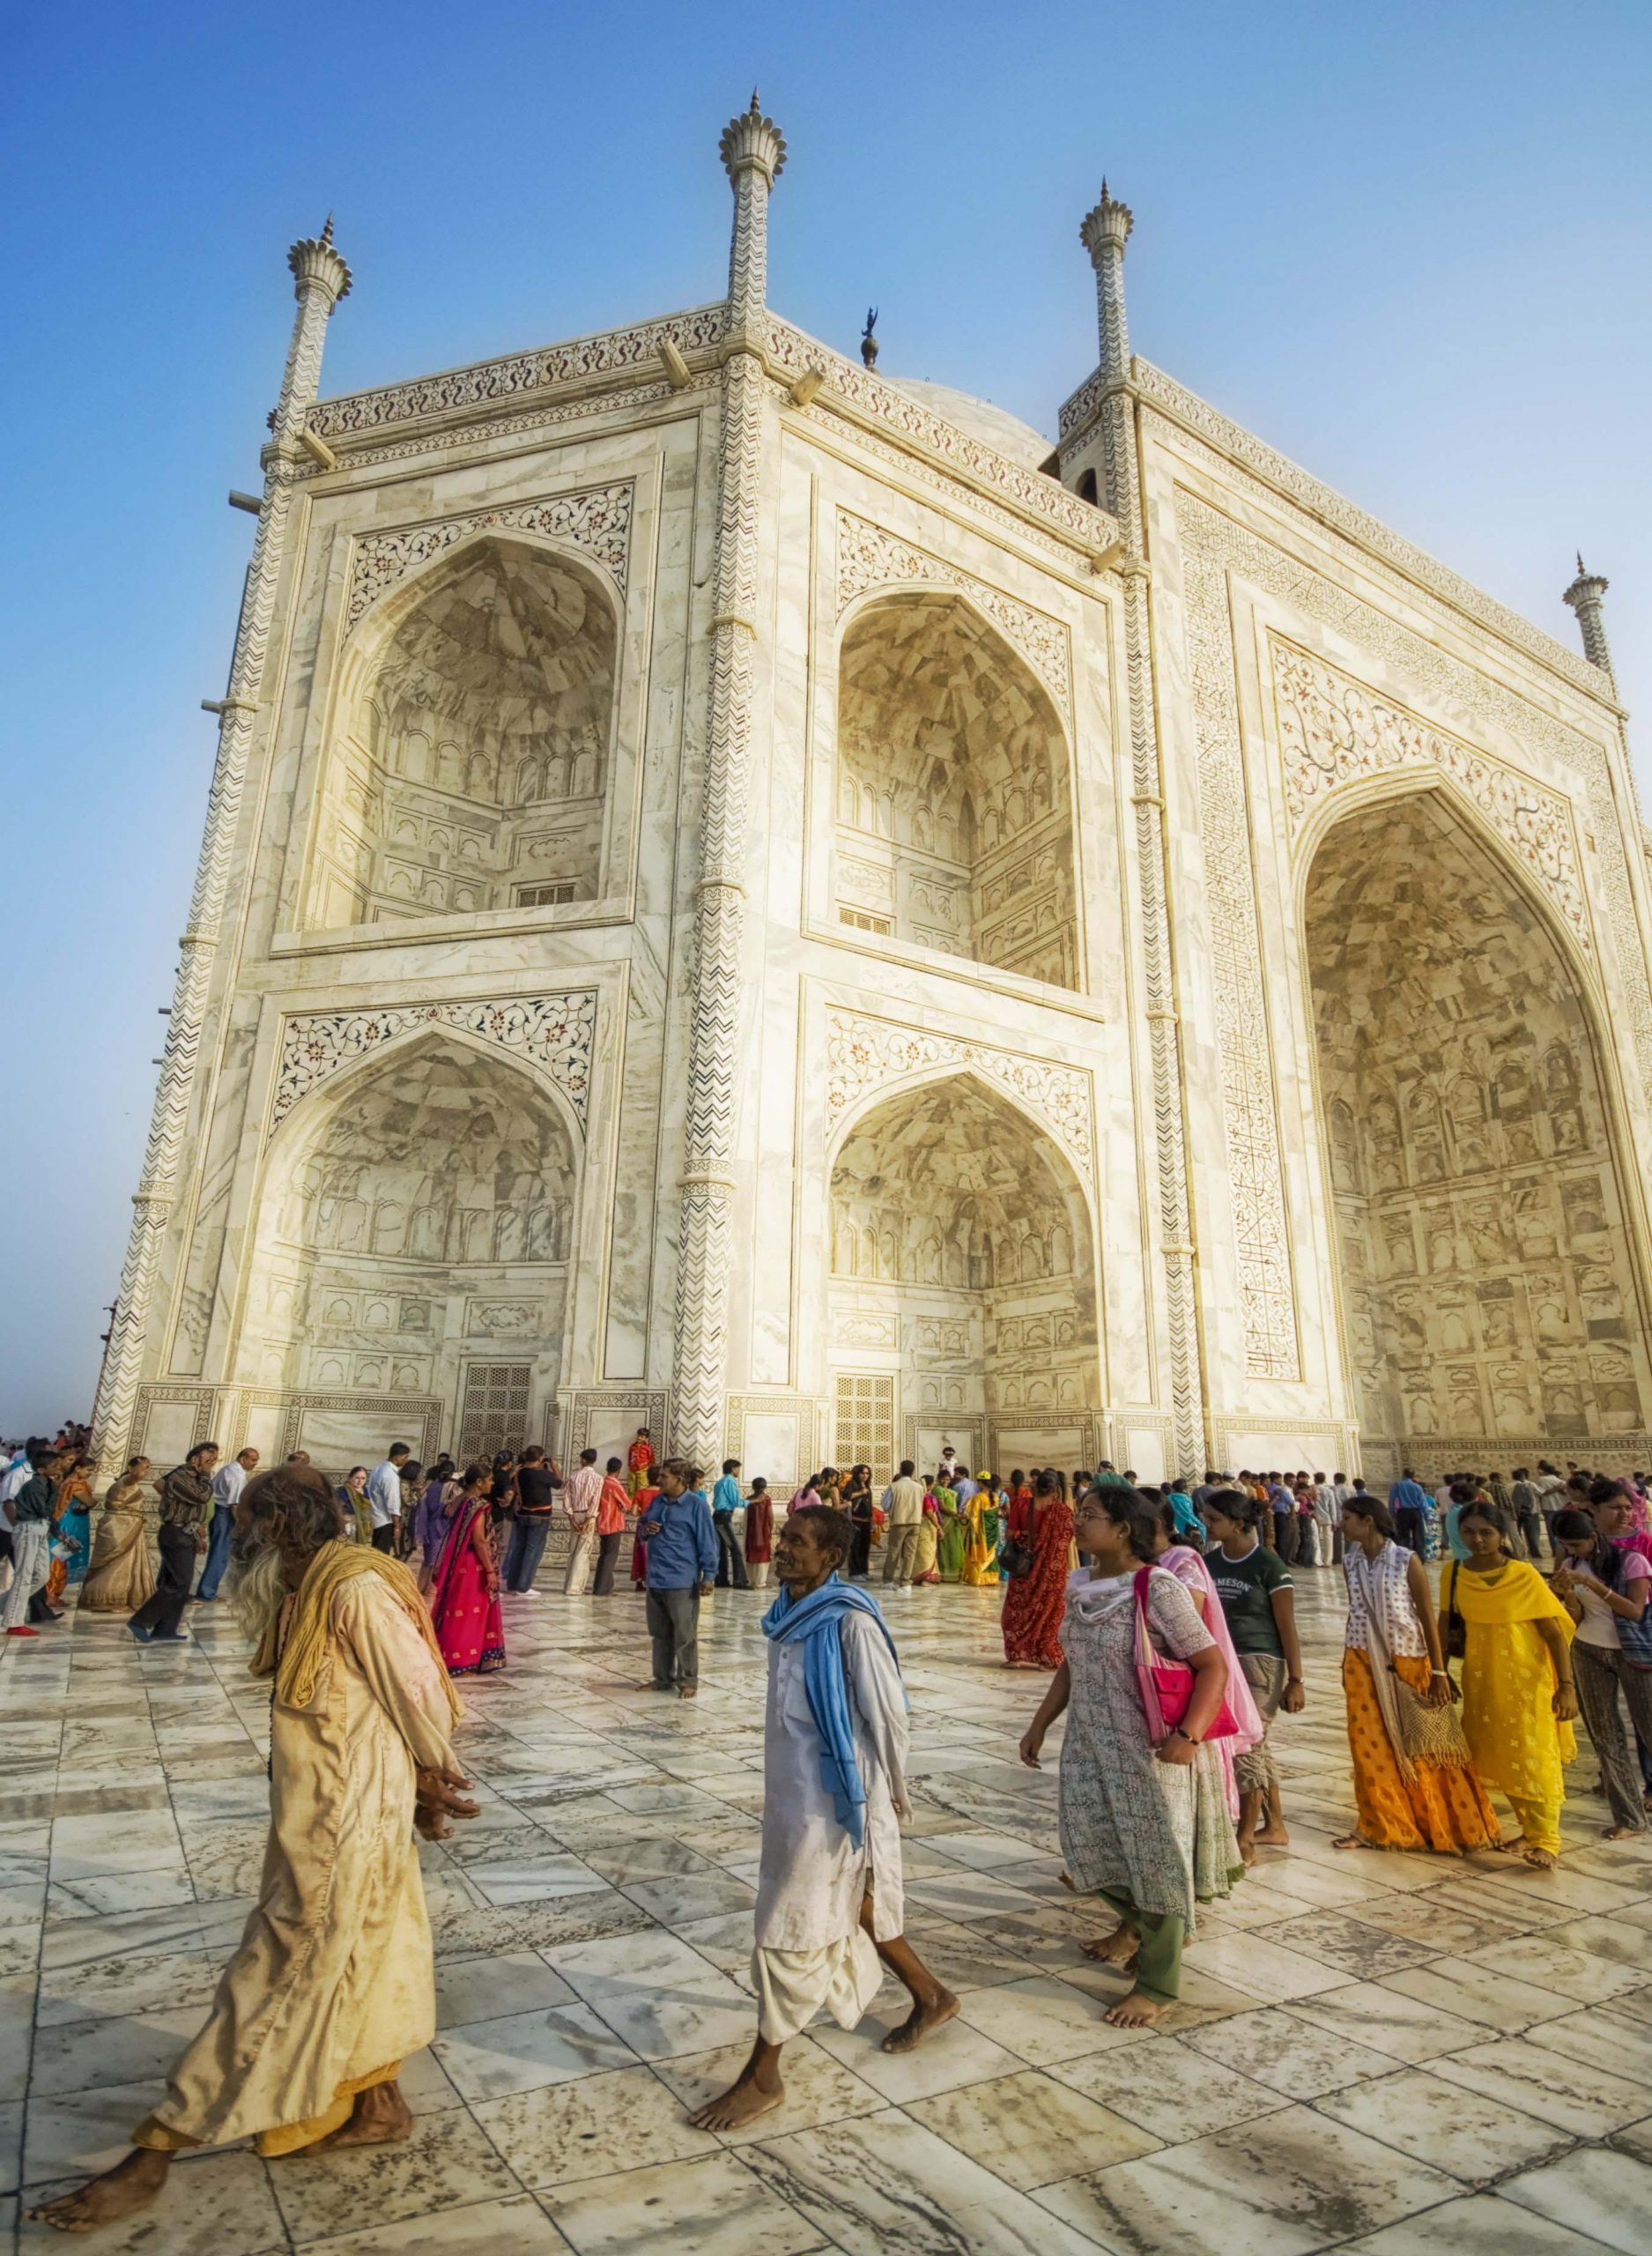 The Colors of India: New Delhi and Agra